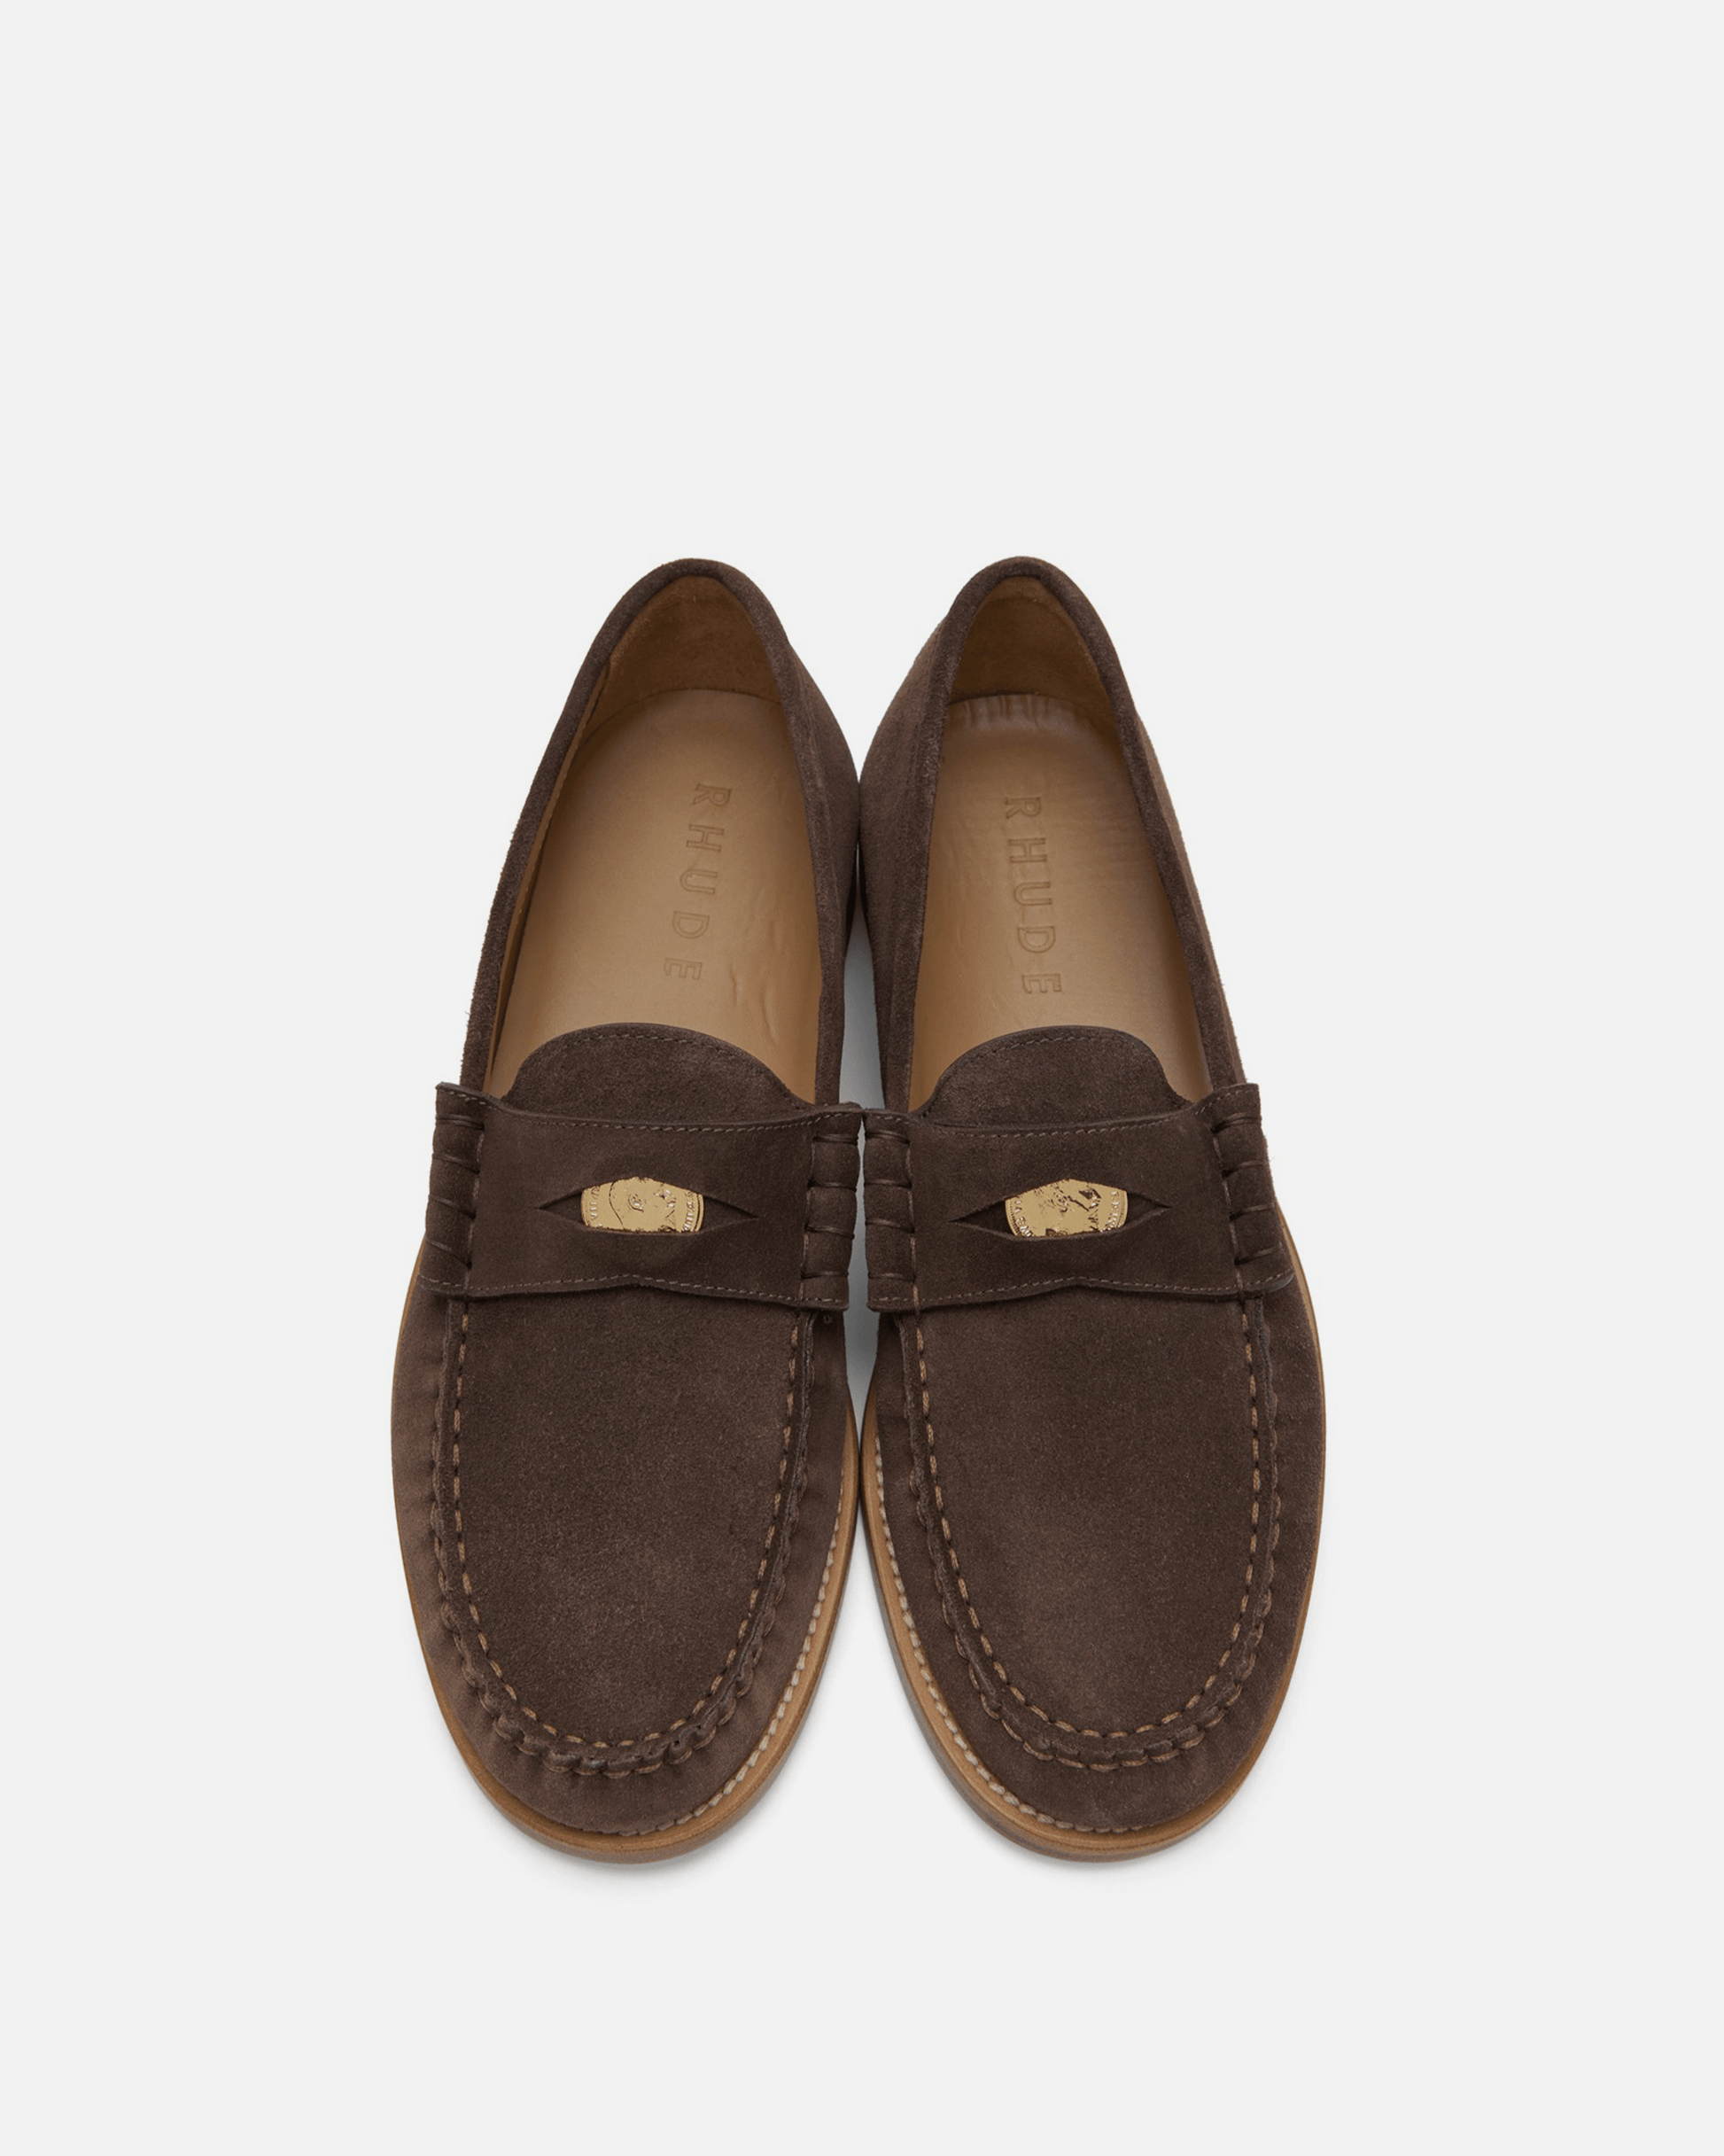 Rhude Men's Shoes Suede Penny Loafers in Brown